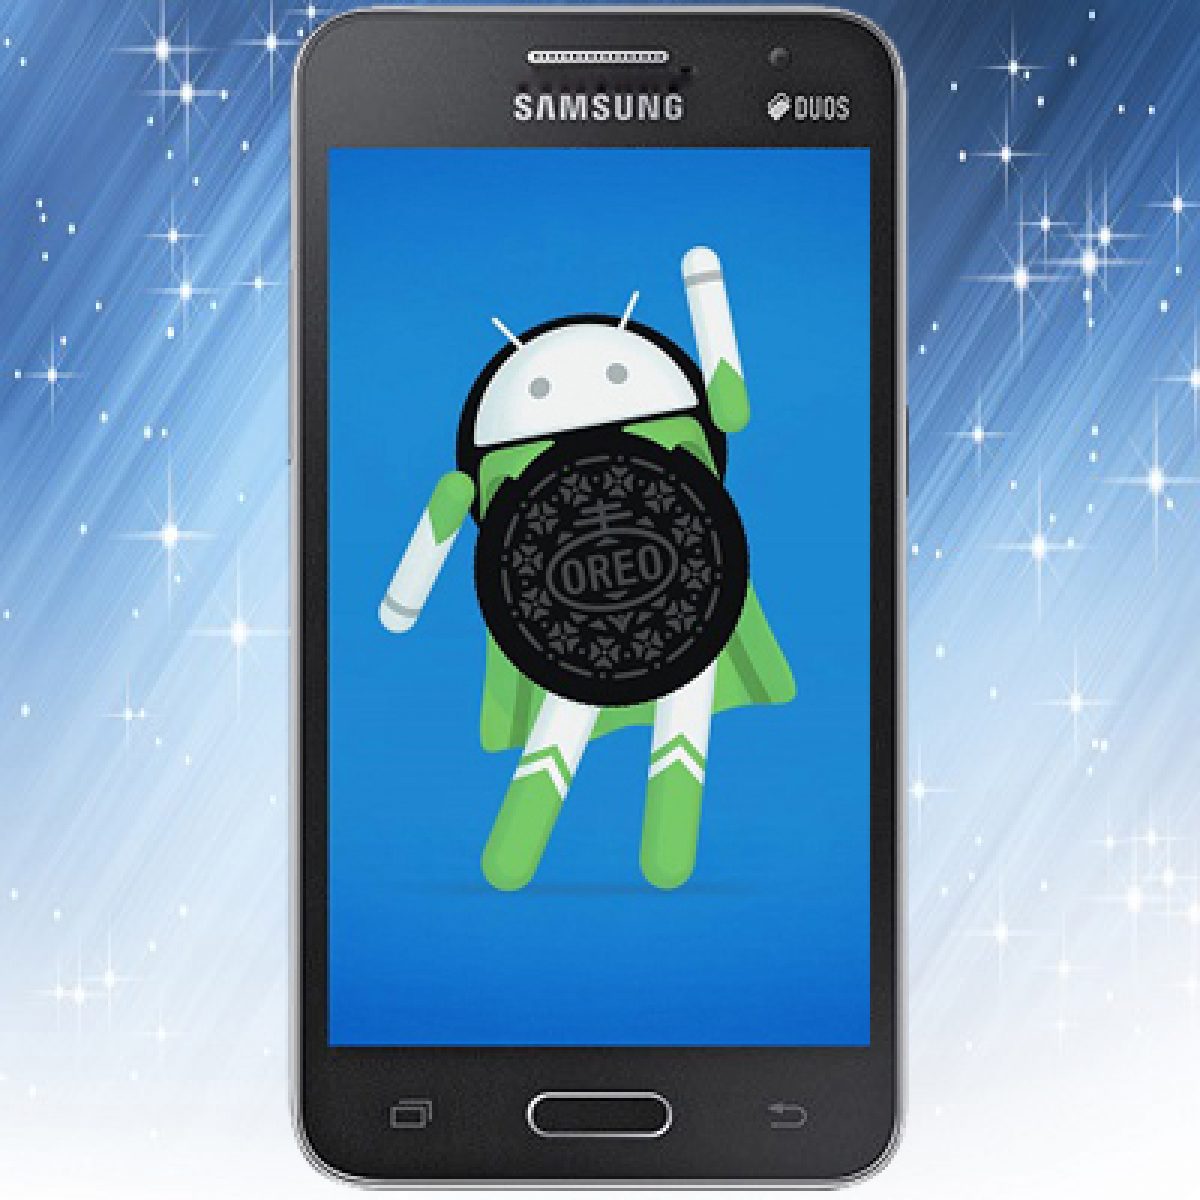 Install Android 8 0 Oreo Rom On Samsung Galaxy Core 2 Sm G355h